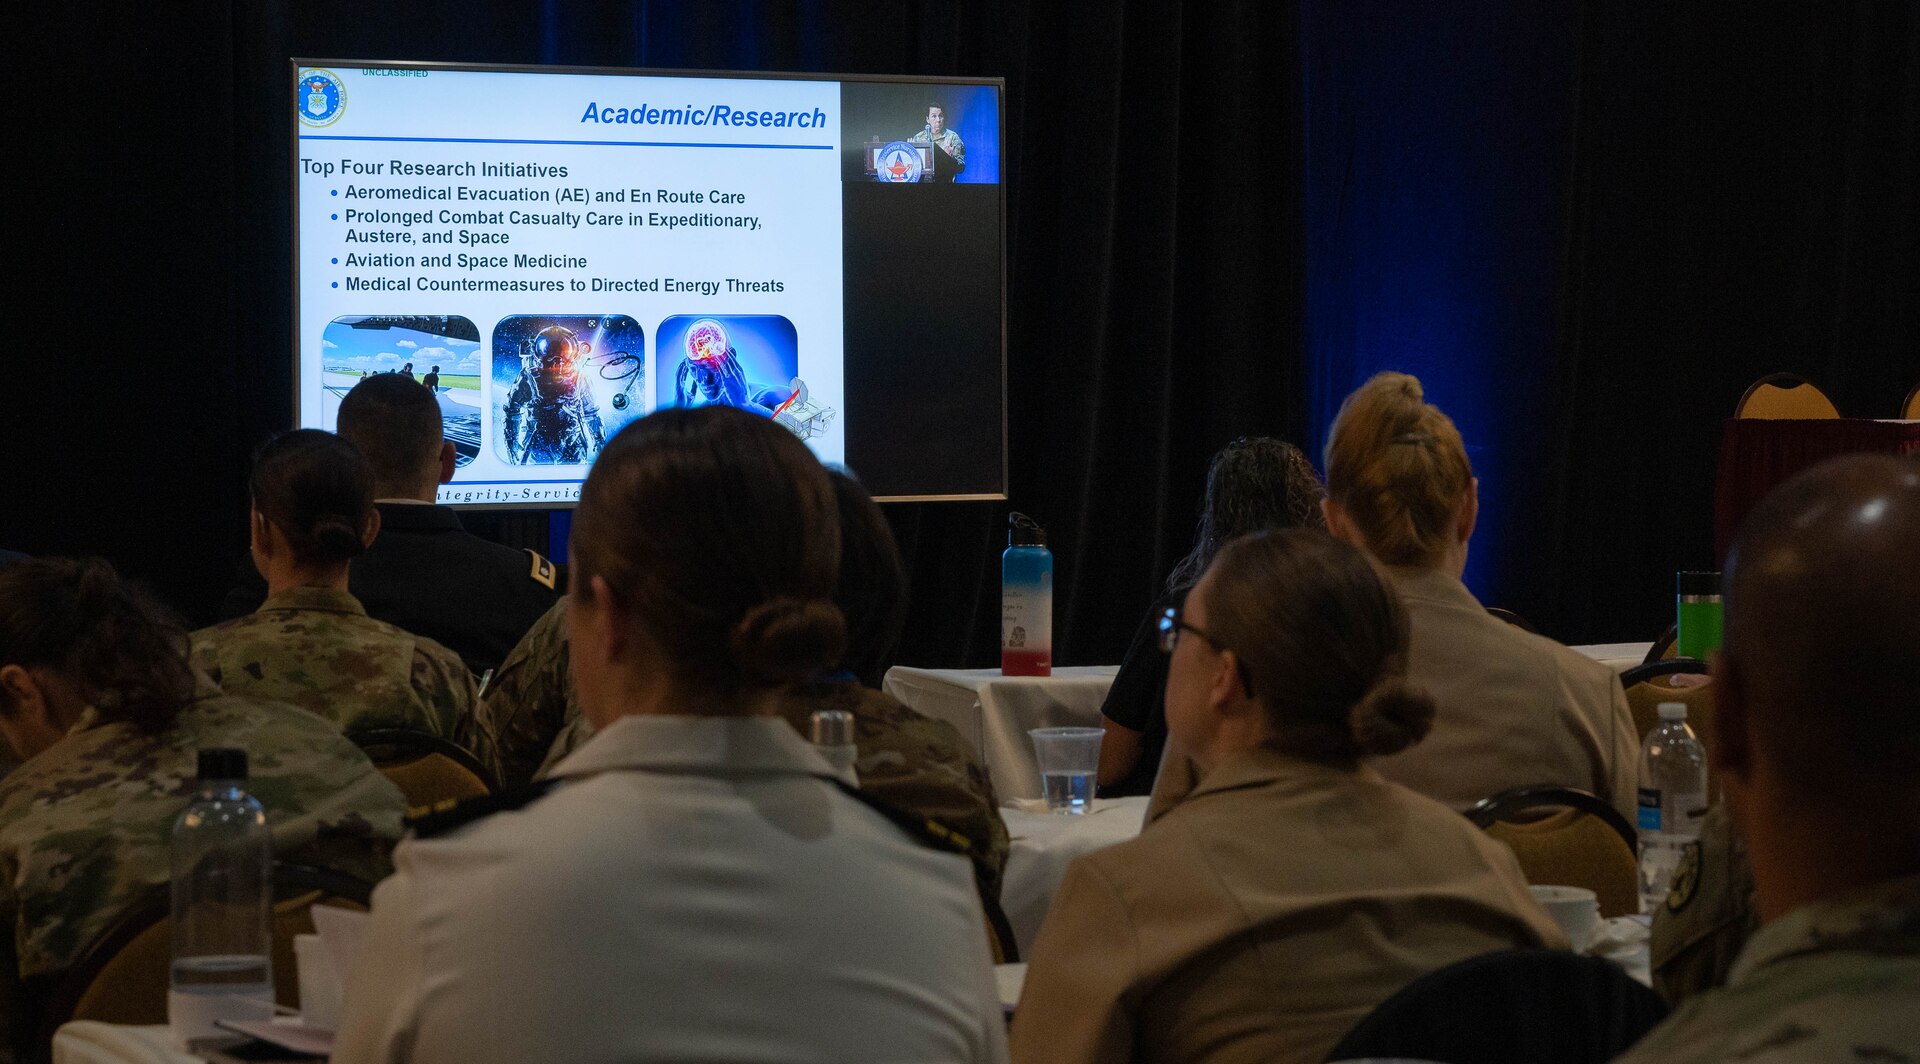 The TriService Nursing Research Program's annual Dissemination Course was held on April 4-6th, 2023, San Antonio, Texas. A room full of people sit while Brig. Gen. Jeannine Ryder, Chief Nurse of the Air Force, presents a  power point discussing the top four research initiatives: aeromedical evacuation (AE) and en route care, prolonged combat casualty care in expeditionary and space, aviation and space medicine, and medical countermeasures to directed energy threats.